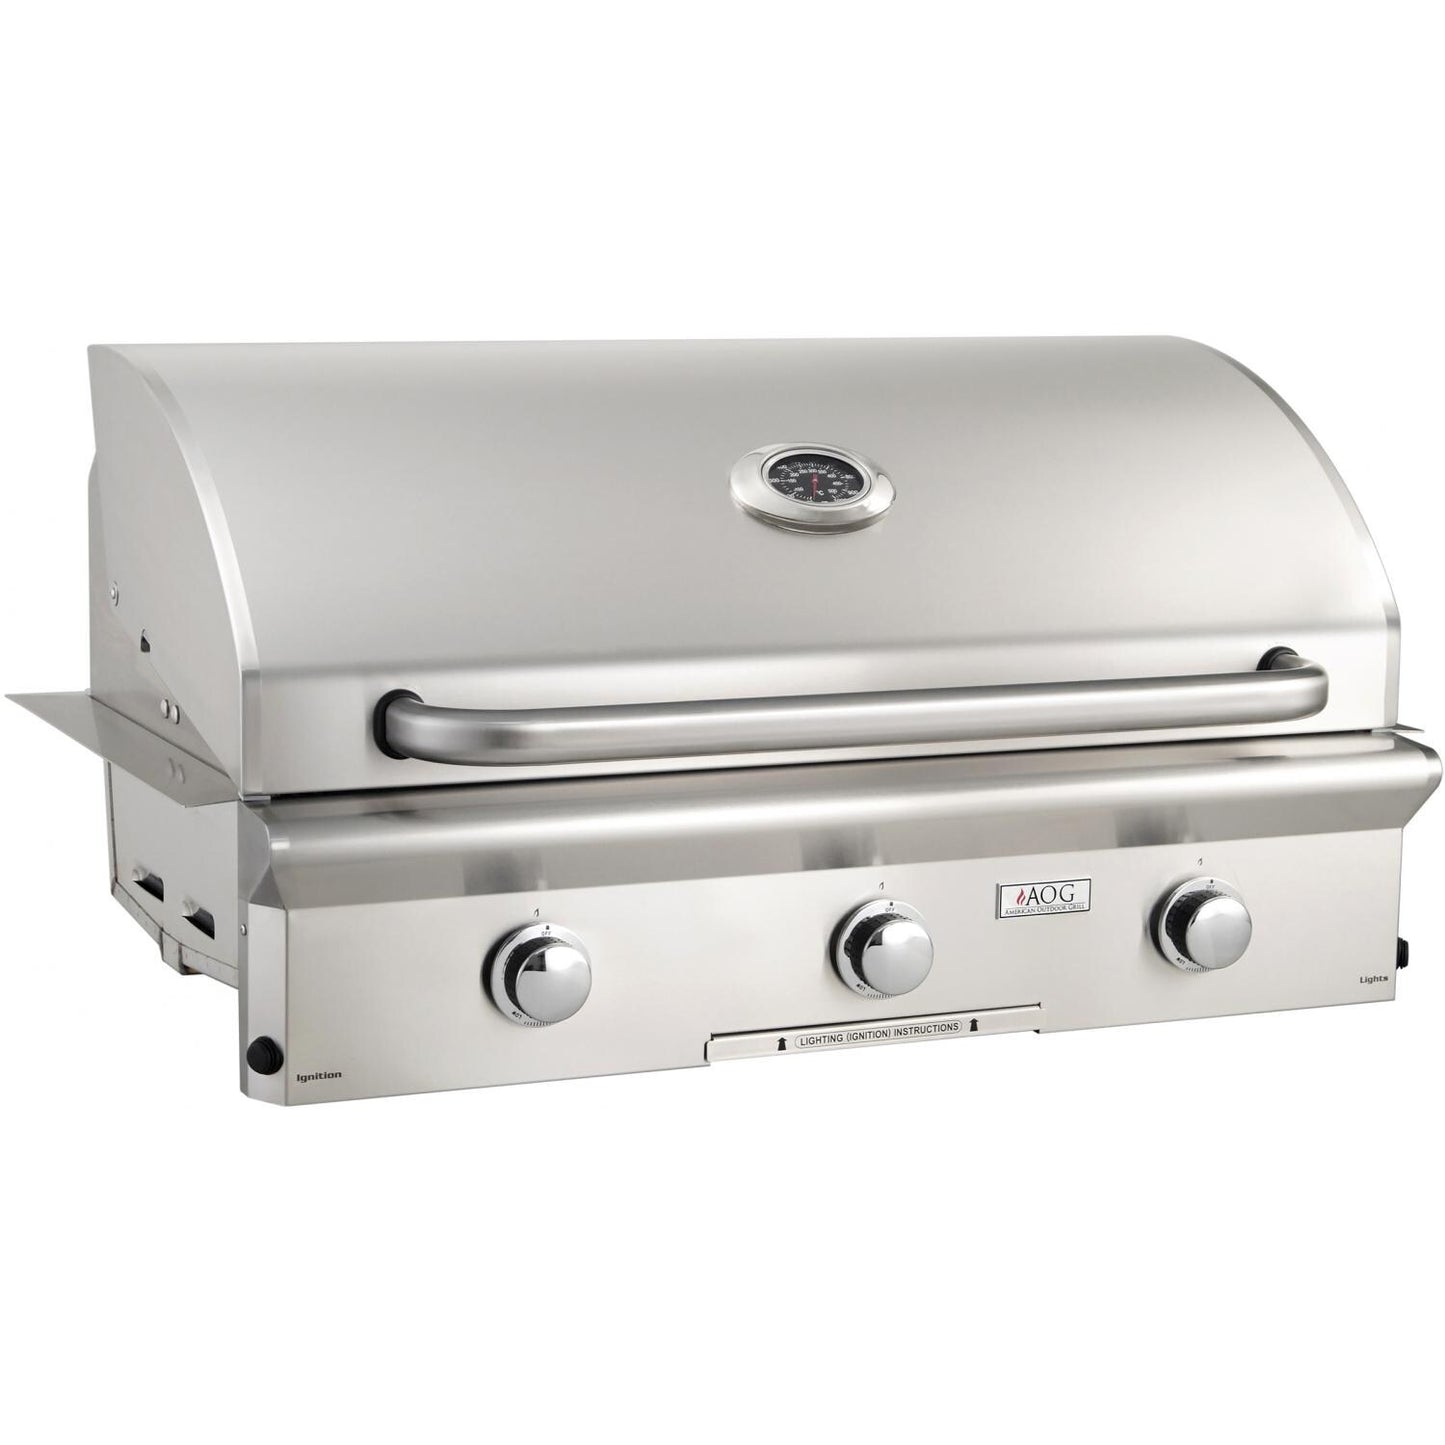 36" American Outdoor Grill (AOG) "L" Series Gas Grill 36NBL-00SP